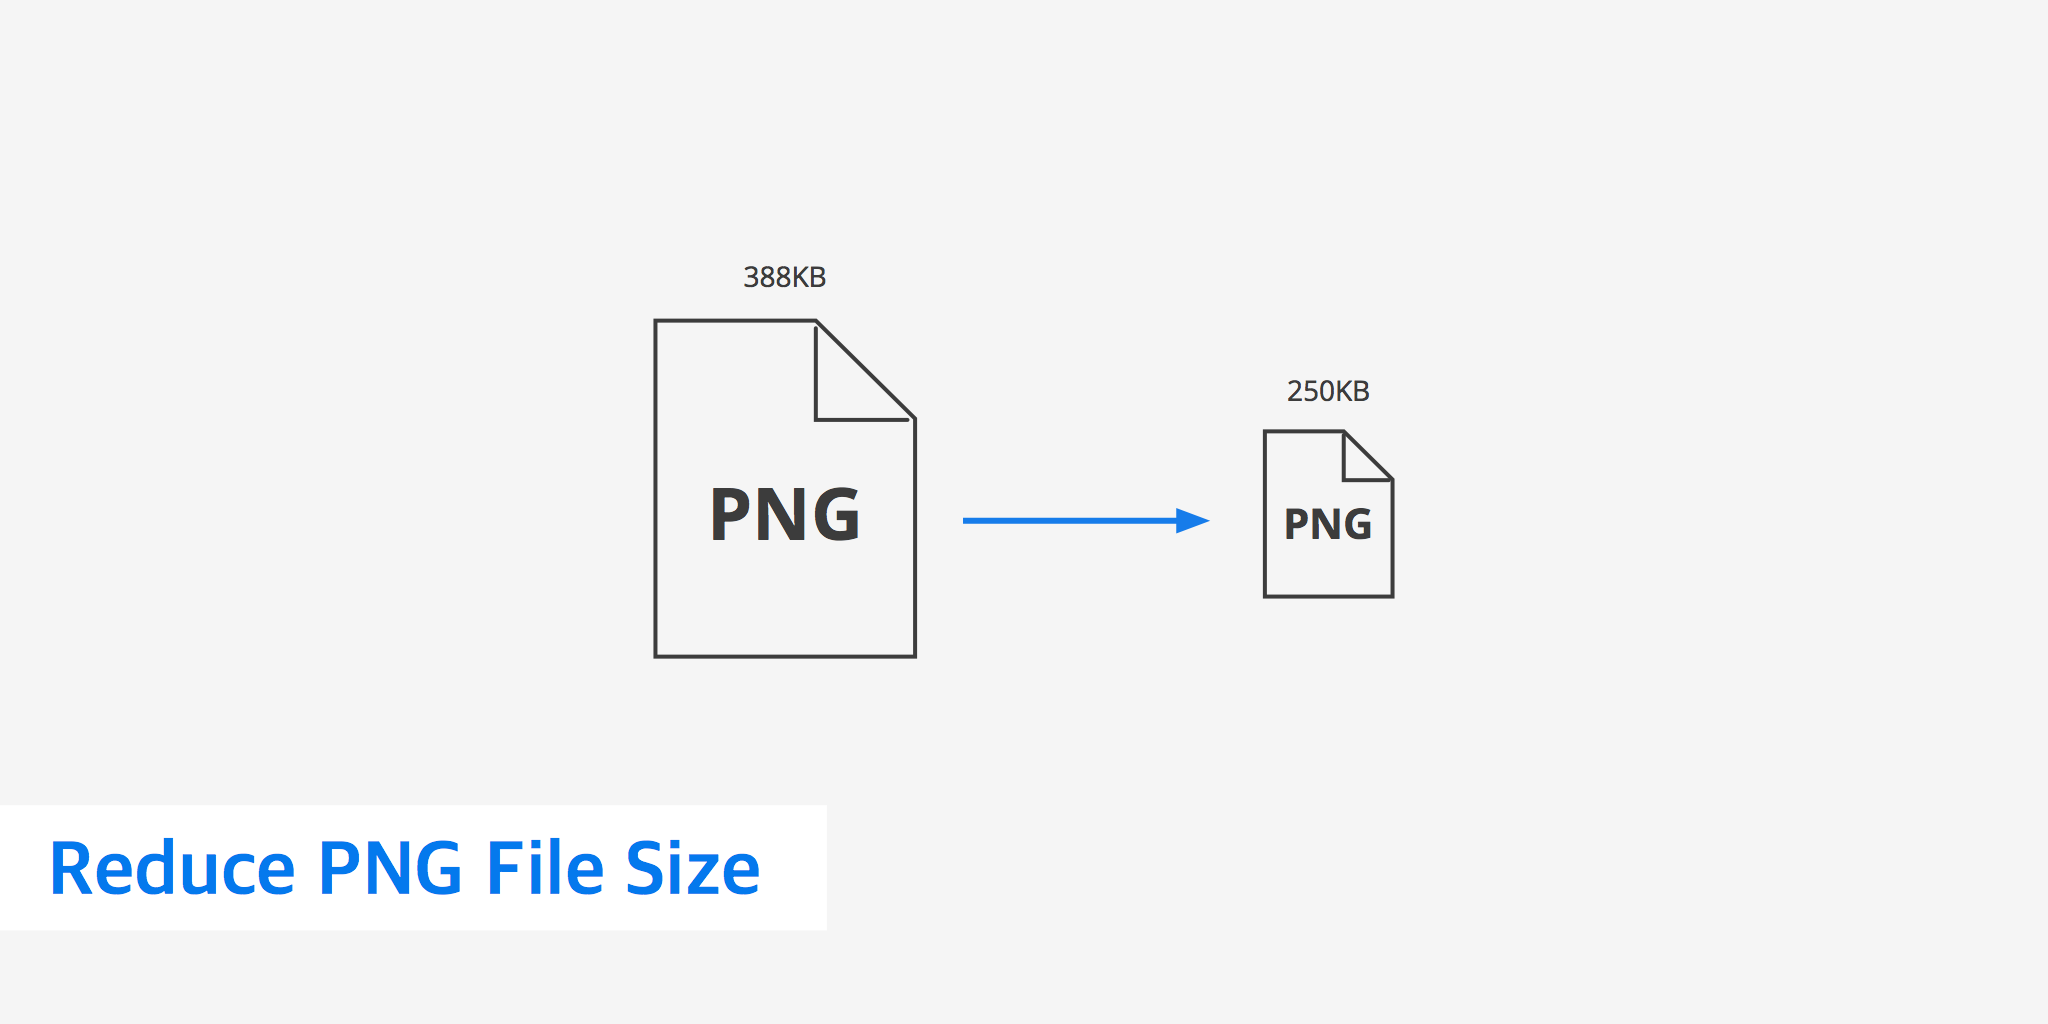 How to Reduce PNG File Size